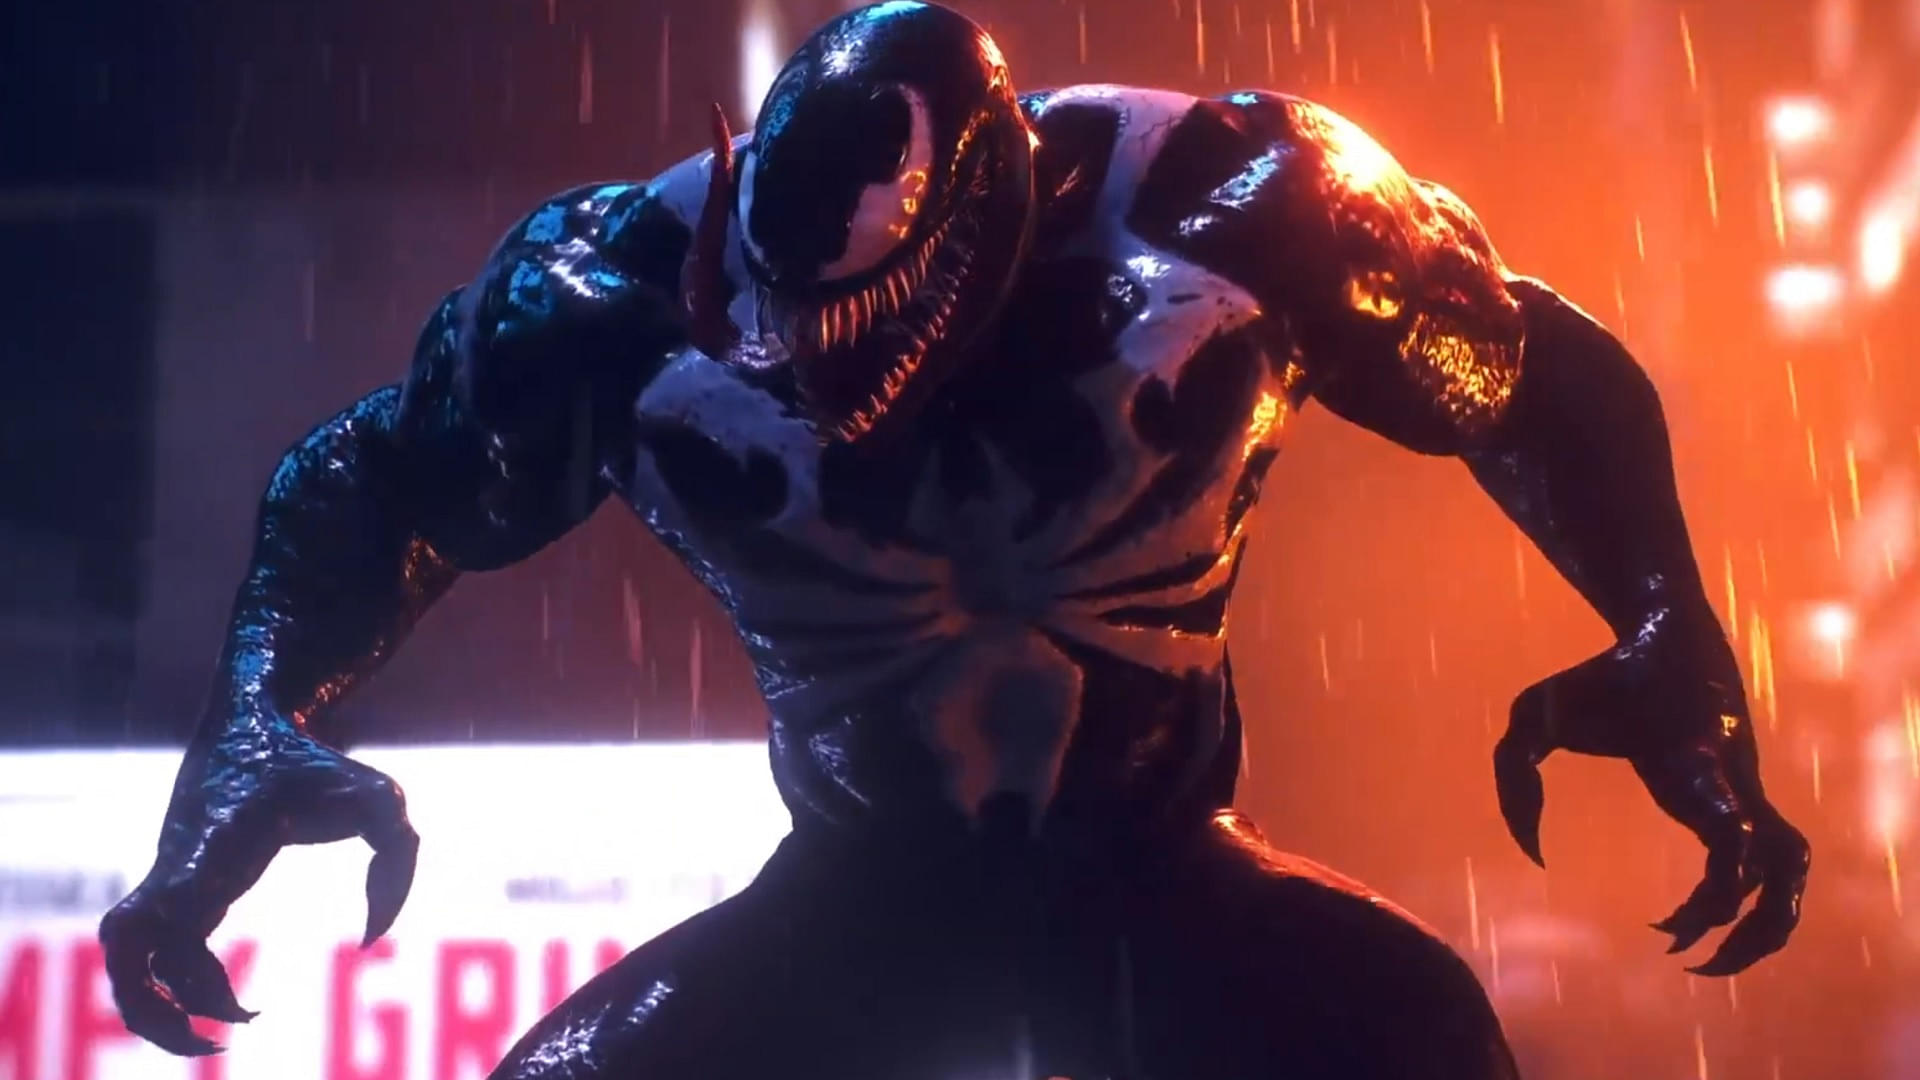 An image showing Venom from Spider-Man 2, who might get a standalone game